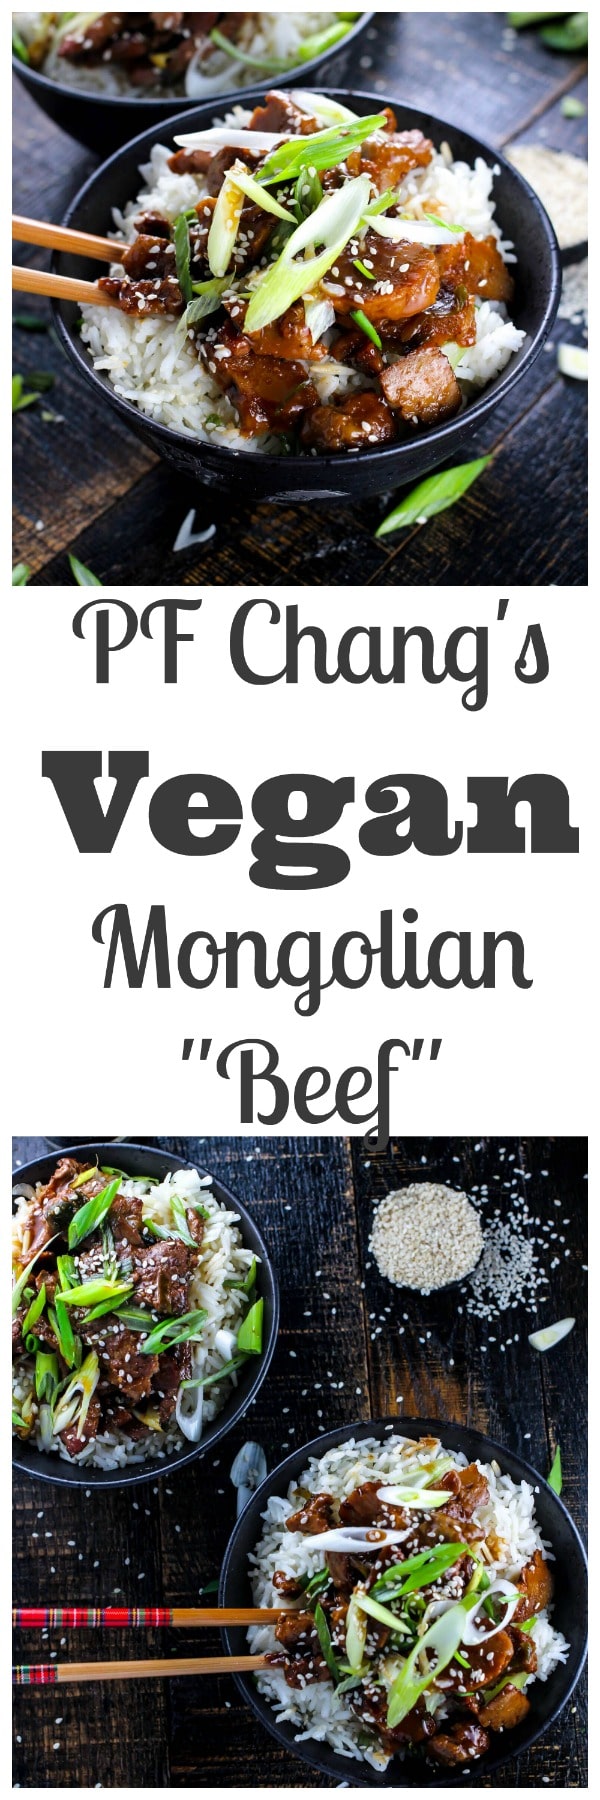 A vegan version of my favorite Chinese take out! This Mongolian "Beef" is tender, saucy and perfectly savory. All of the flavor and you can feel good about eat a great plant based meal!